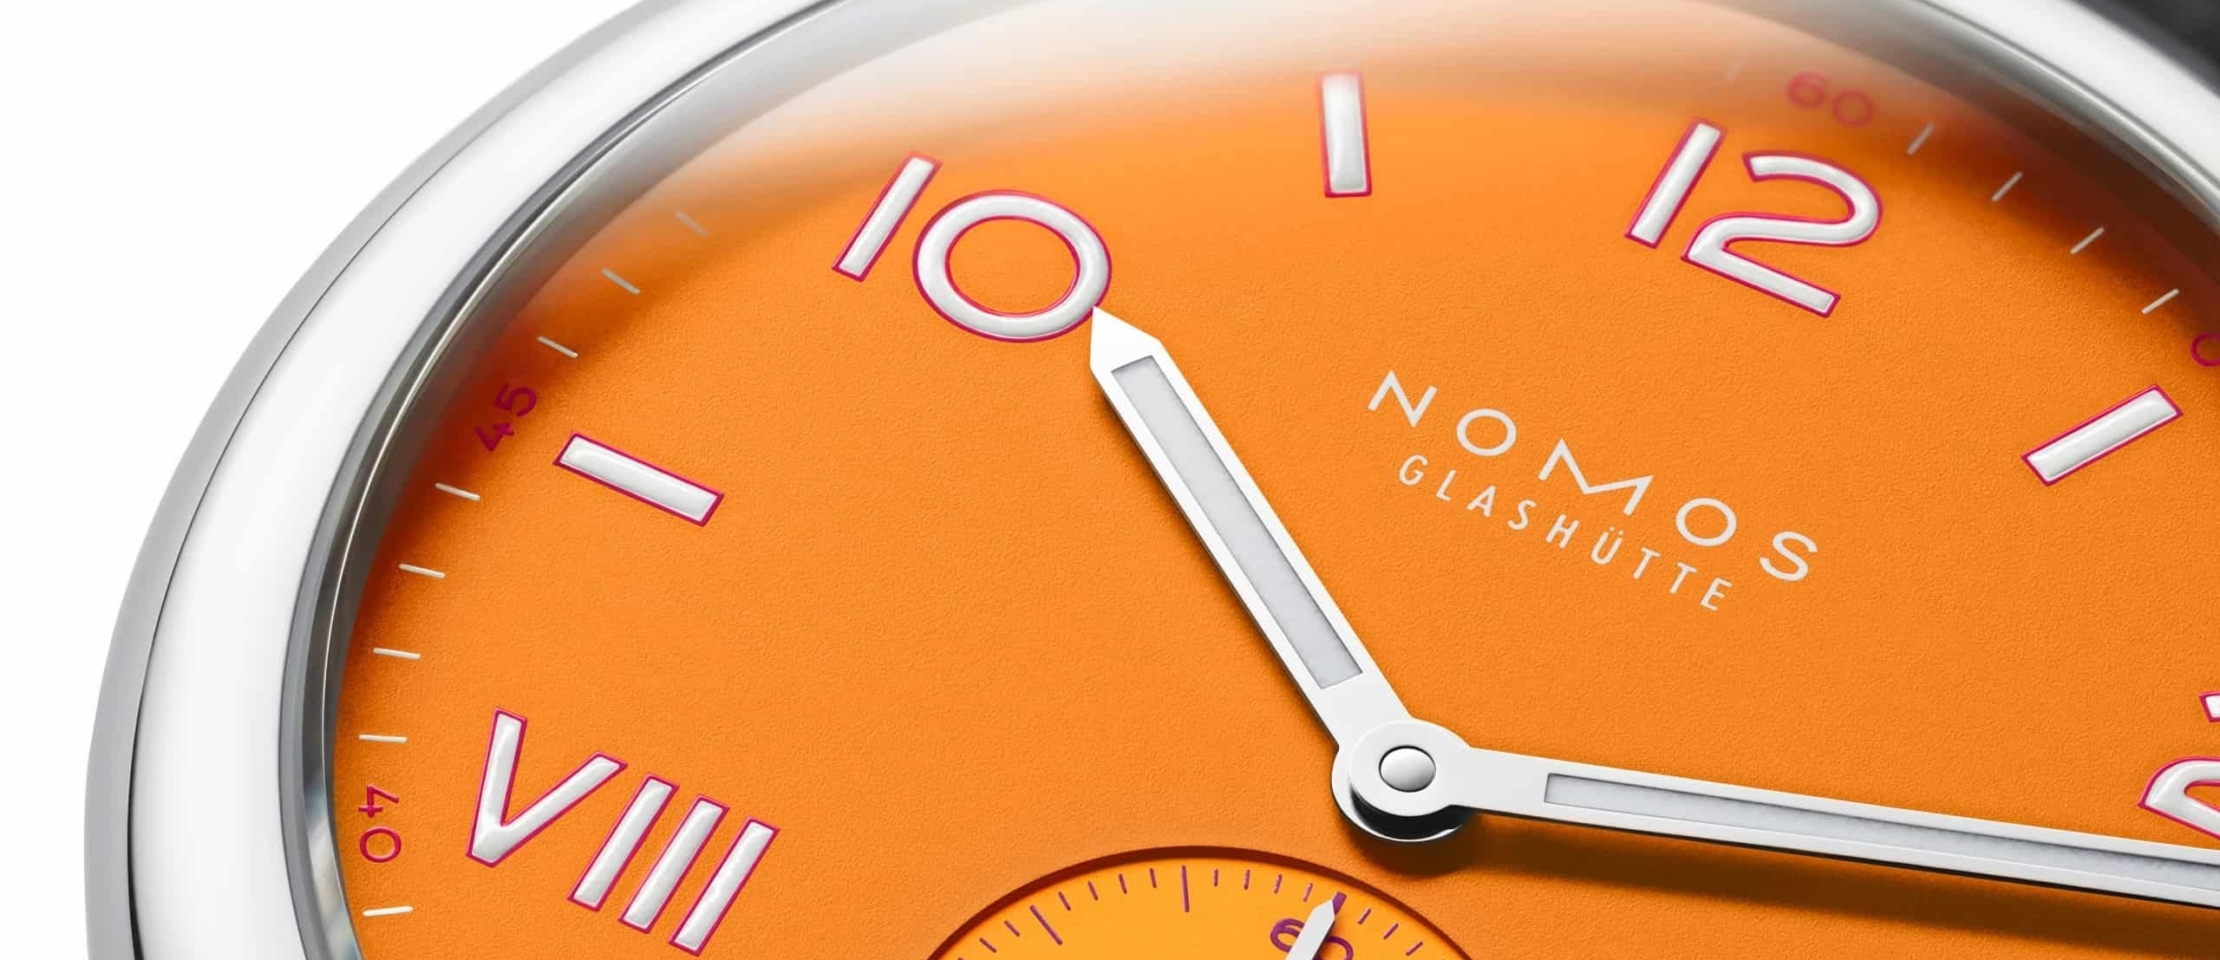 NOMOS Glashütte and Cool Hunting: Colorful Club Campus 38 models for a good cause